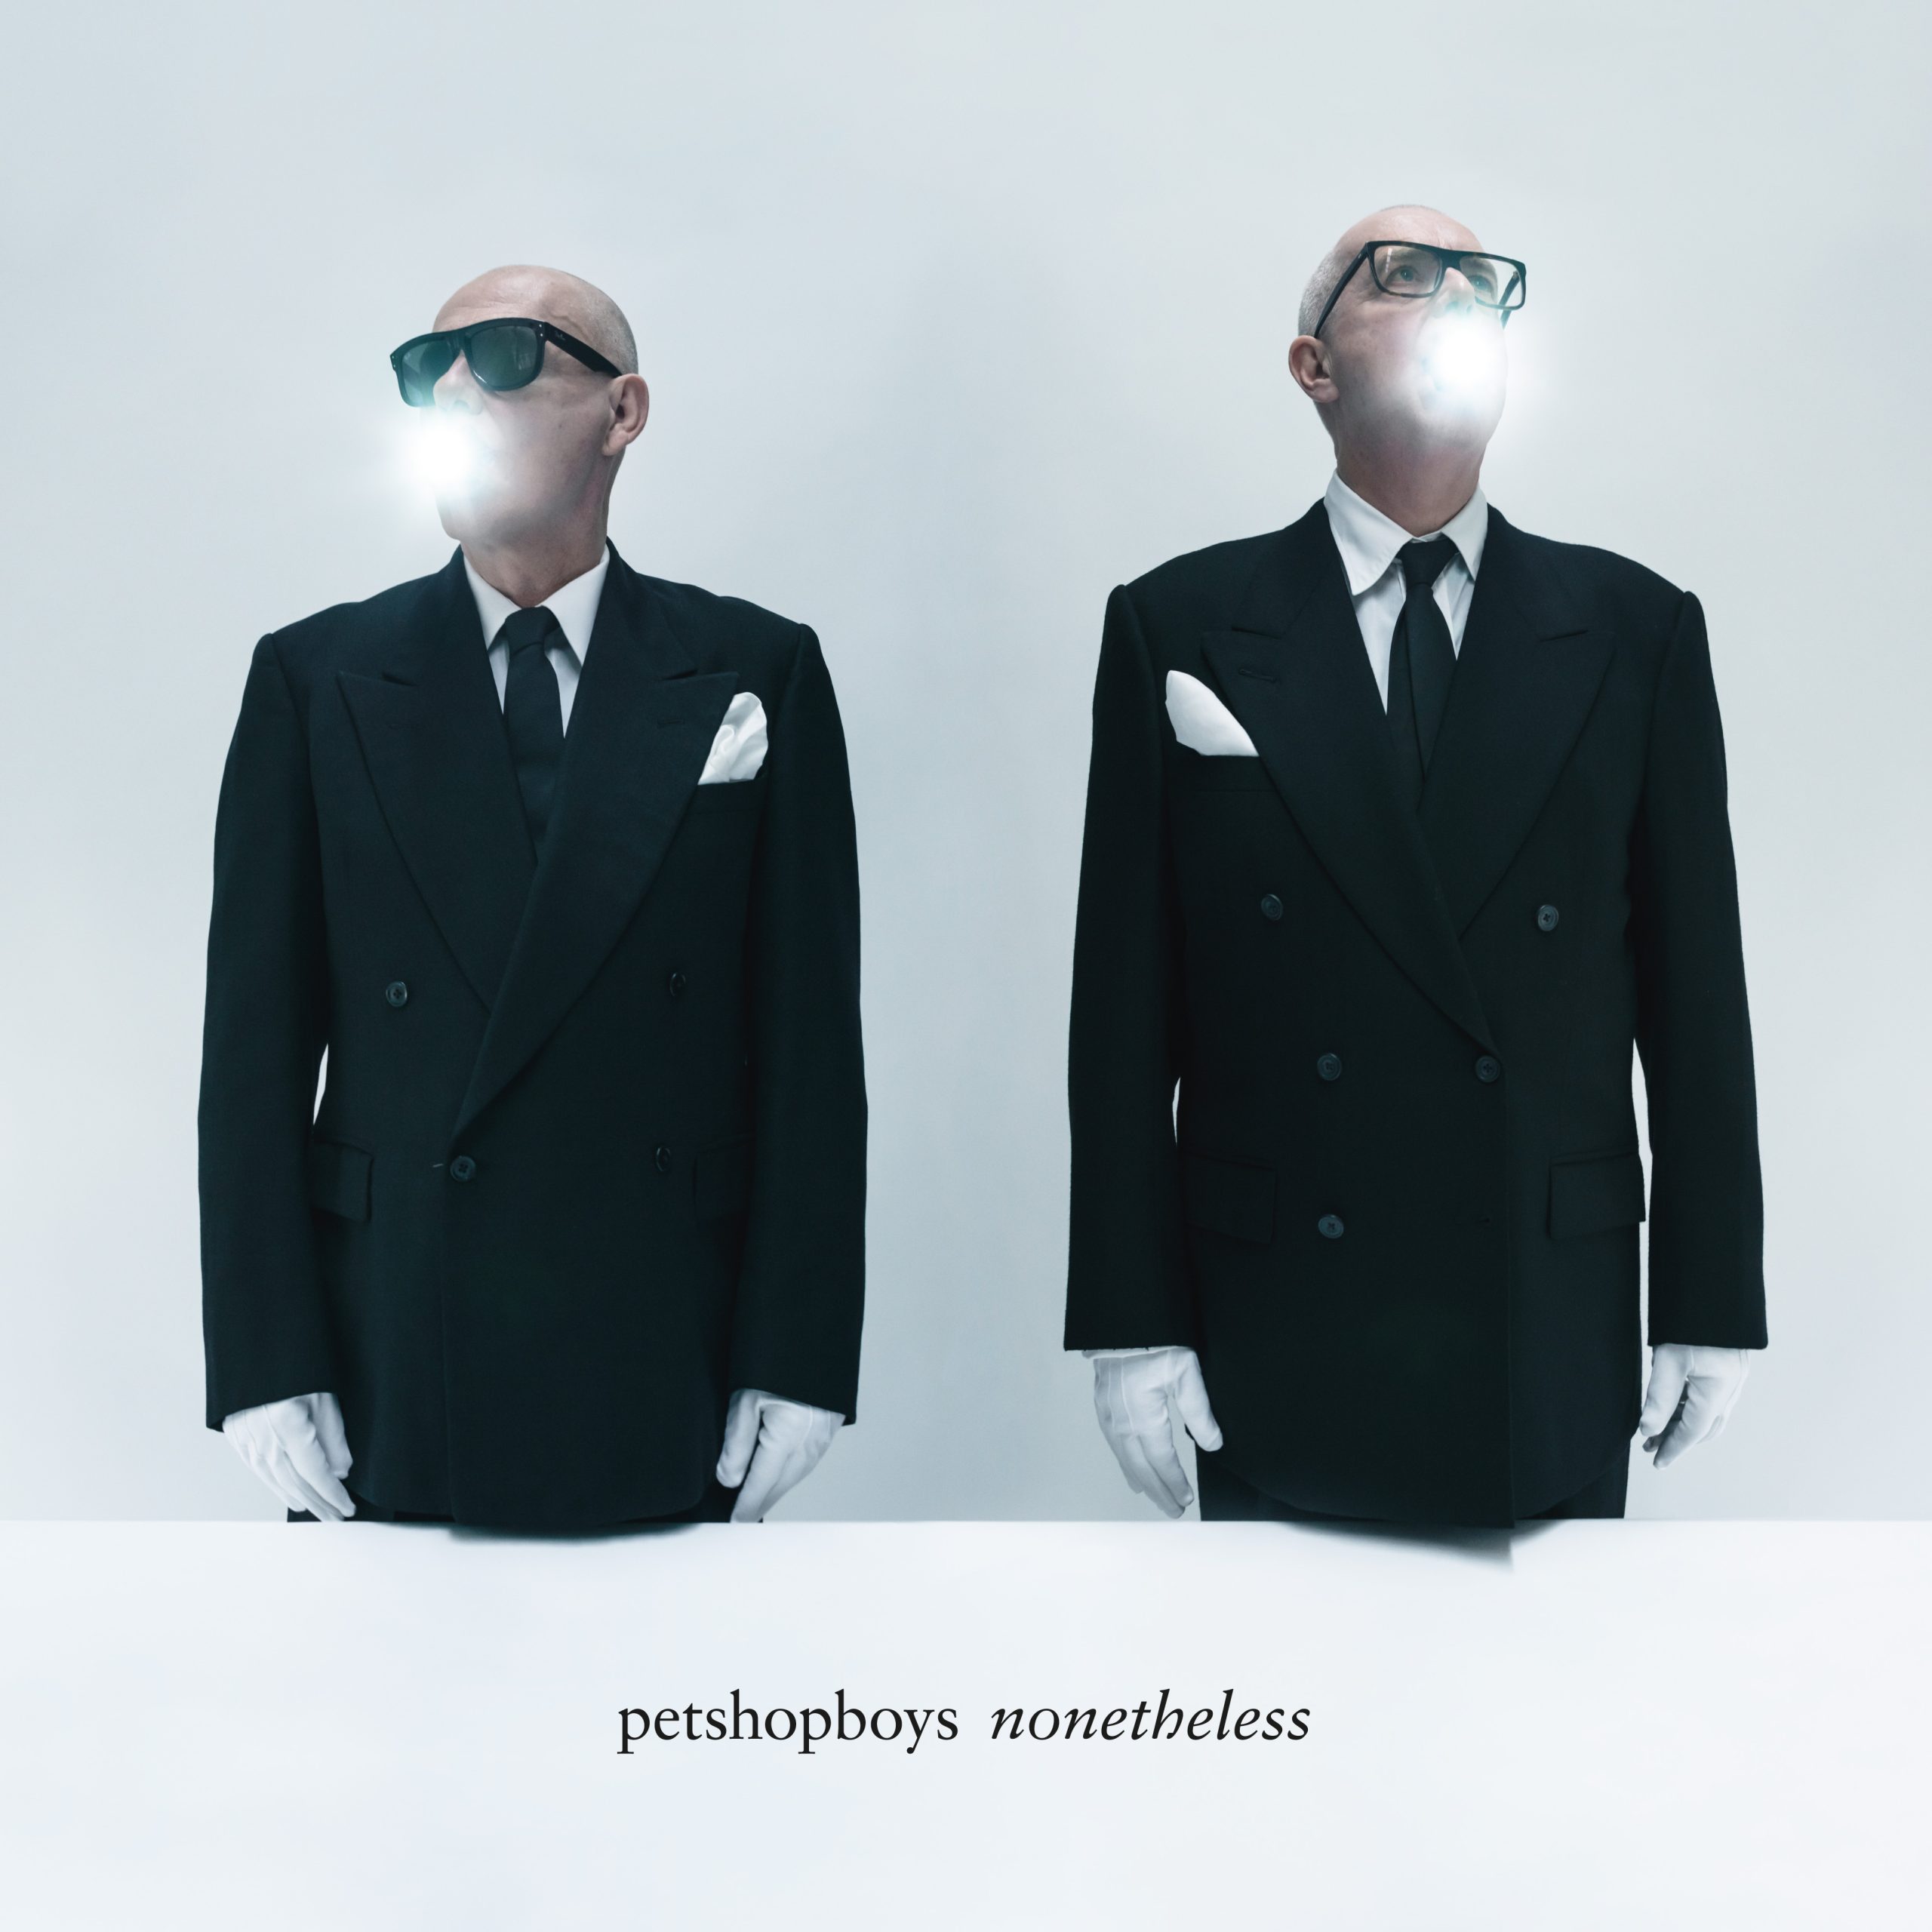 Pet Shop Boys are happy to announce the forthcoming release of their  brand-new studio album, “Nonetheless”, on Parlophone Records on April 26.  The album is available to pre-order now at the link below. The first single  from the album, “Loneliness”, is out